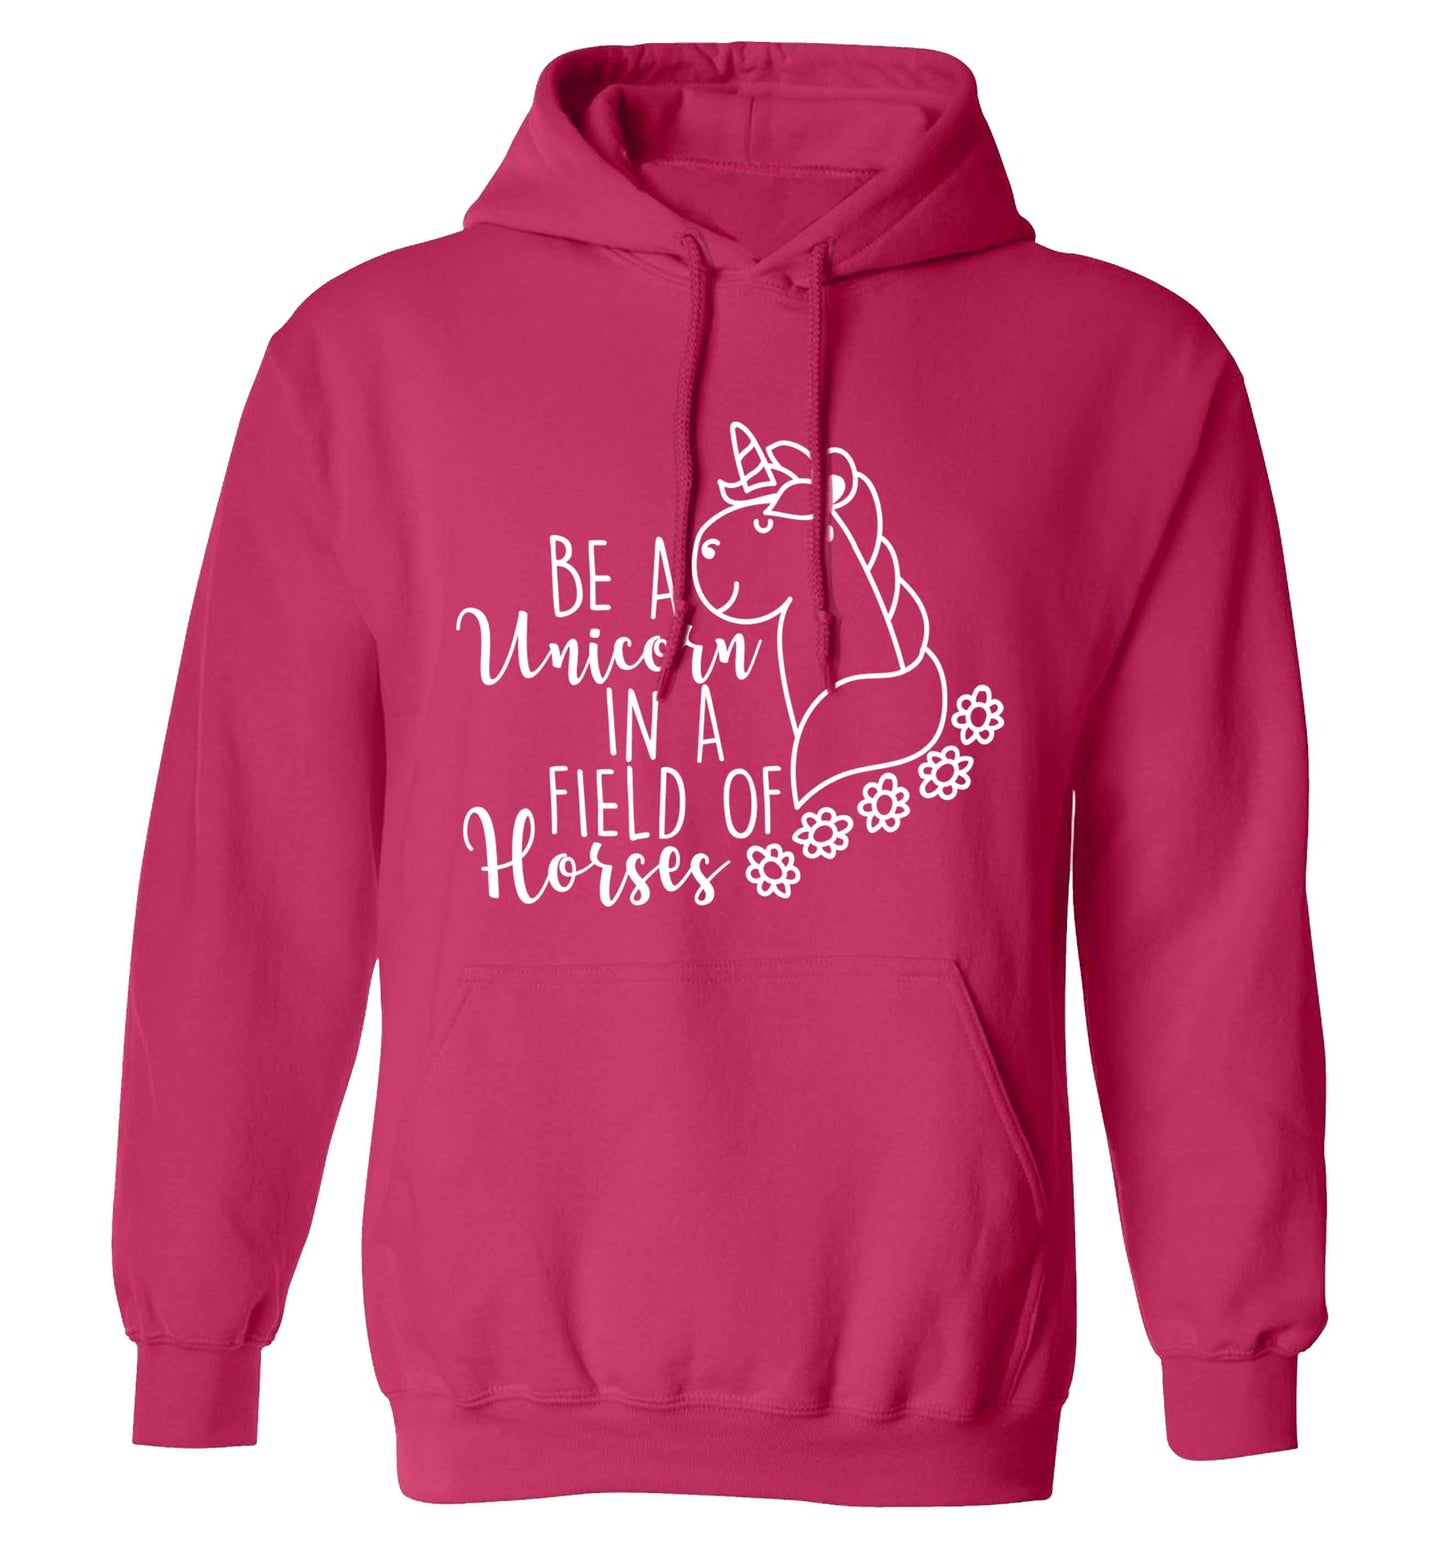 Be a unicorn in a field of horses adults unisex pink hoodie 2XL